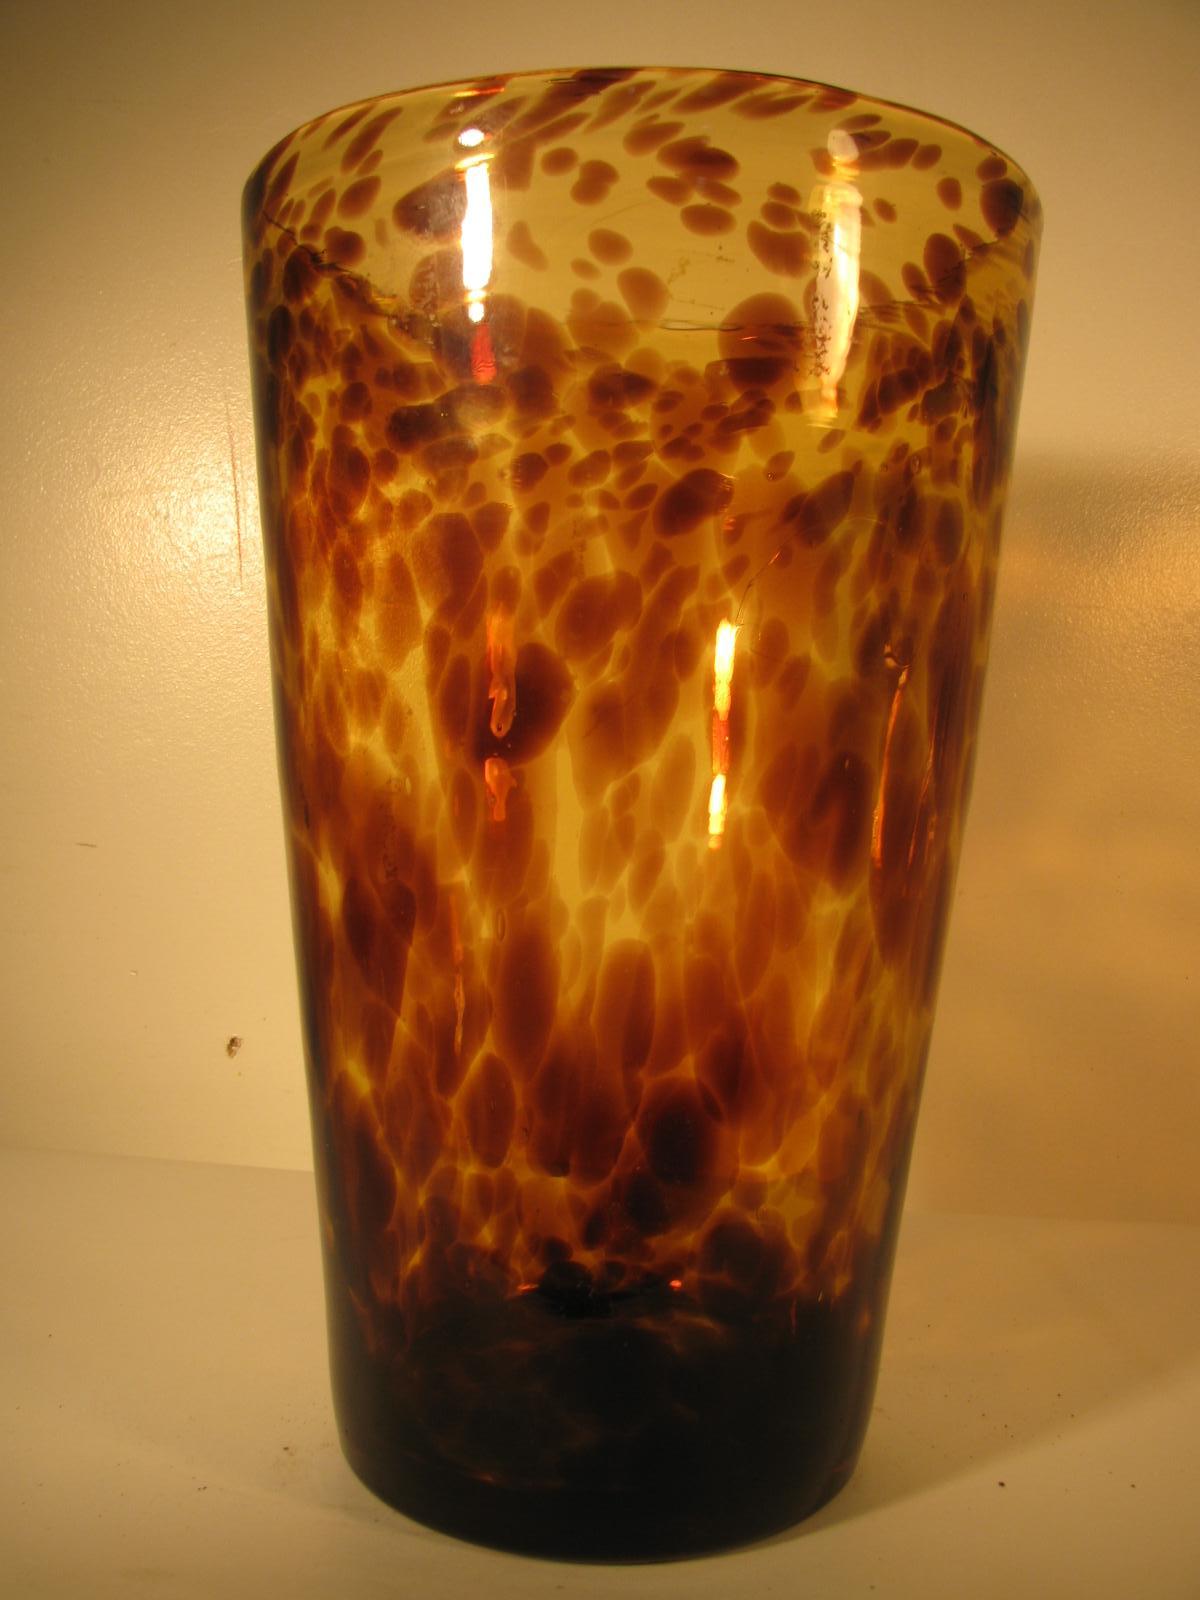 Beautiful vase created in Murano using the tortoiseshell decoration technique. Tall (11.75in) and very elegant vase tapers from 5in. to 7.5in. as it rises. Polished pontil on base.